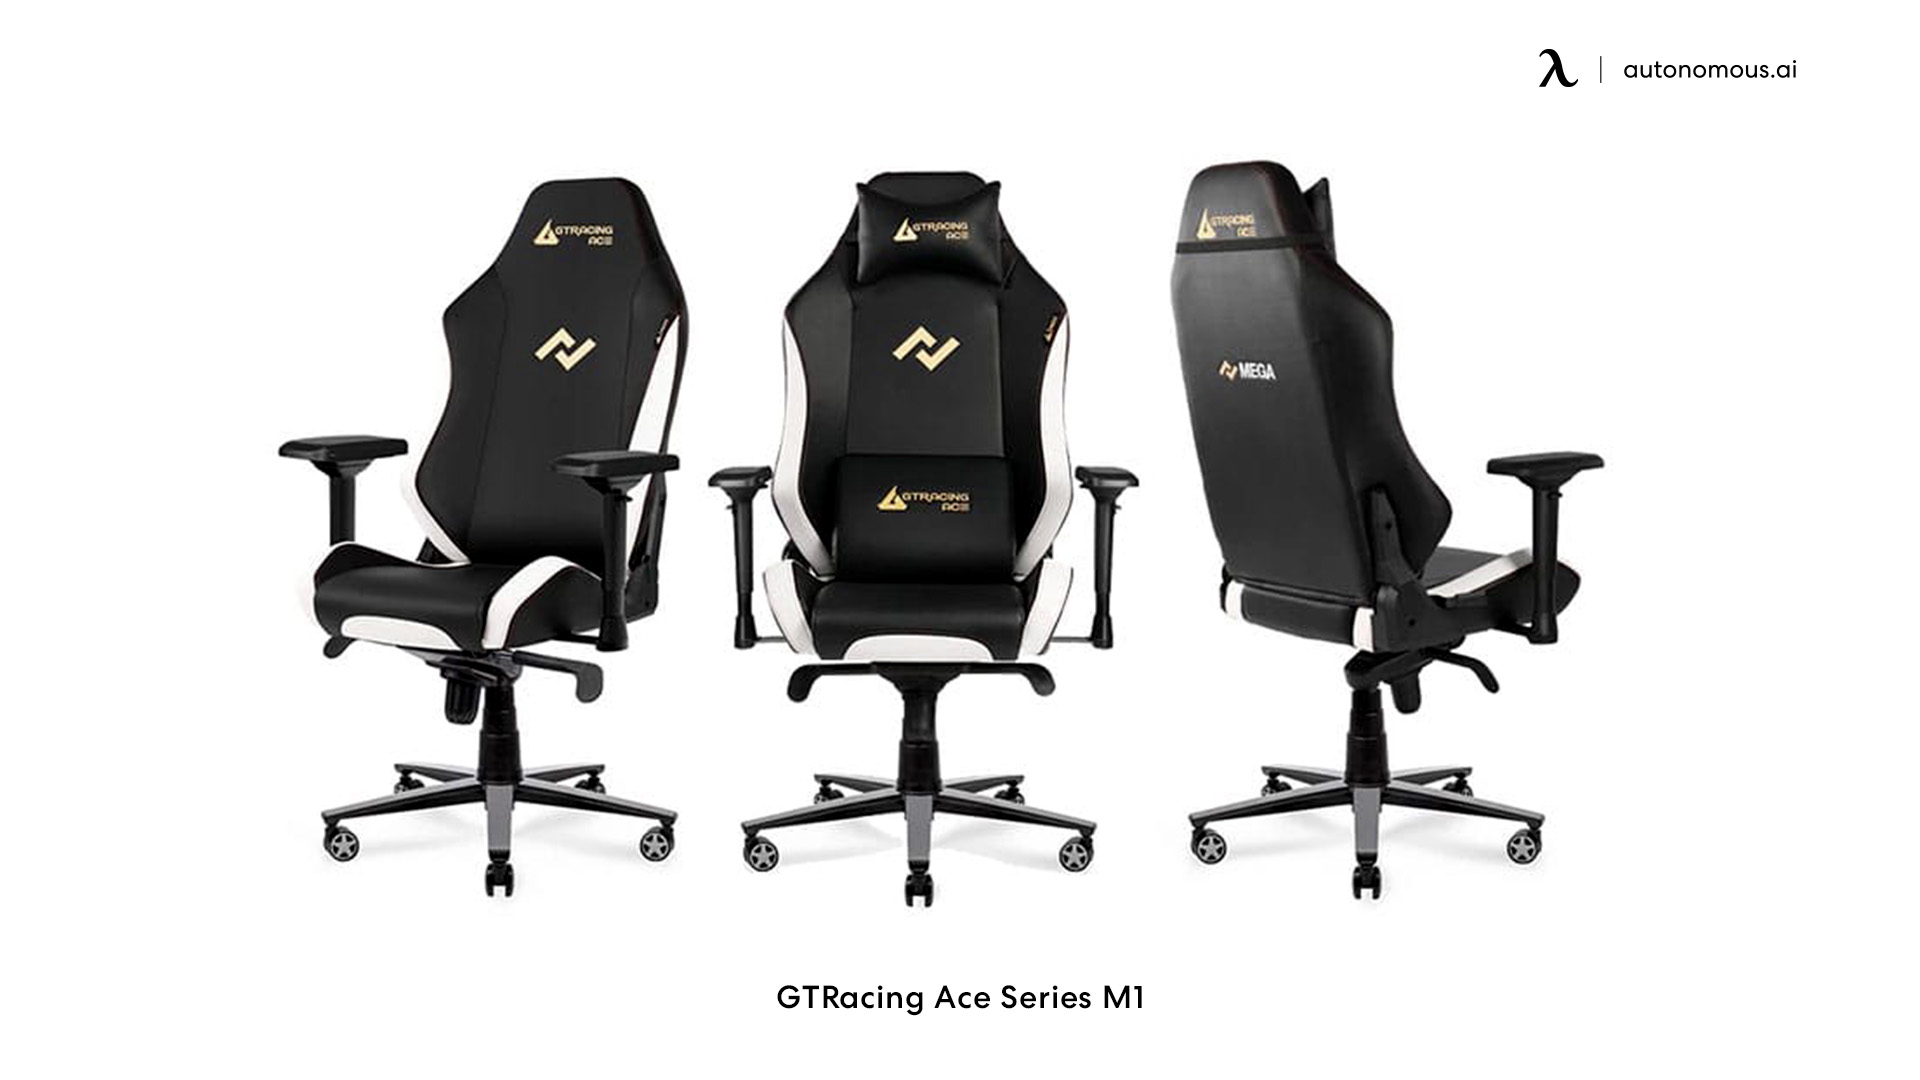 GTRacing Ace Series M1 best gaming chair under $300